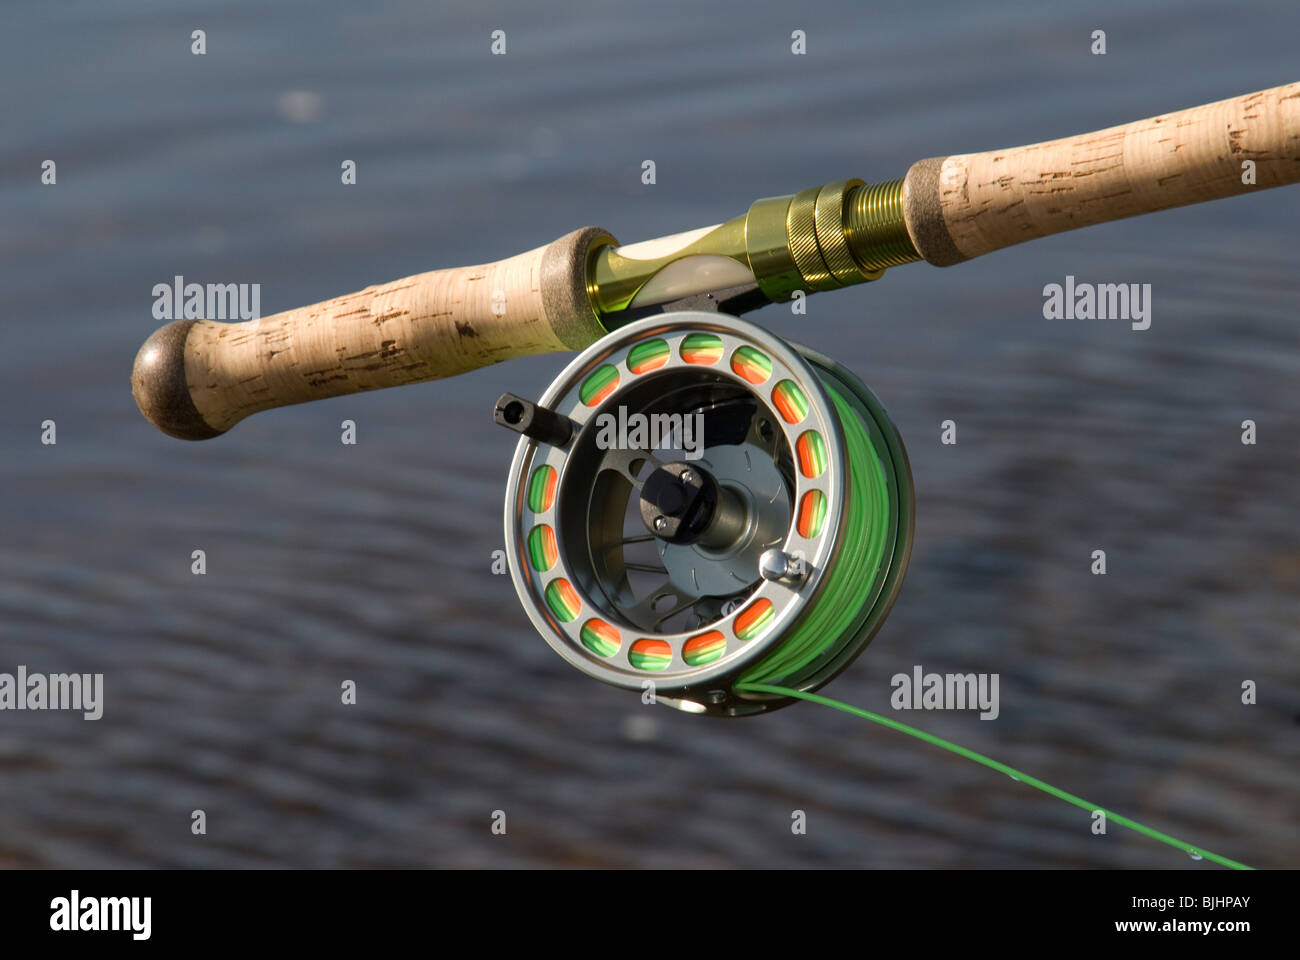 Fly rod and reel used for Atlantic salmon fishing Stock Photo - Alamy